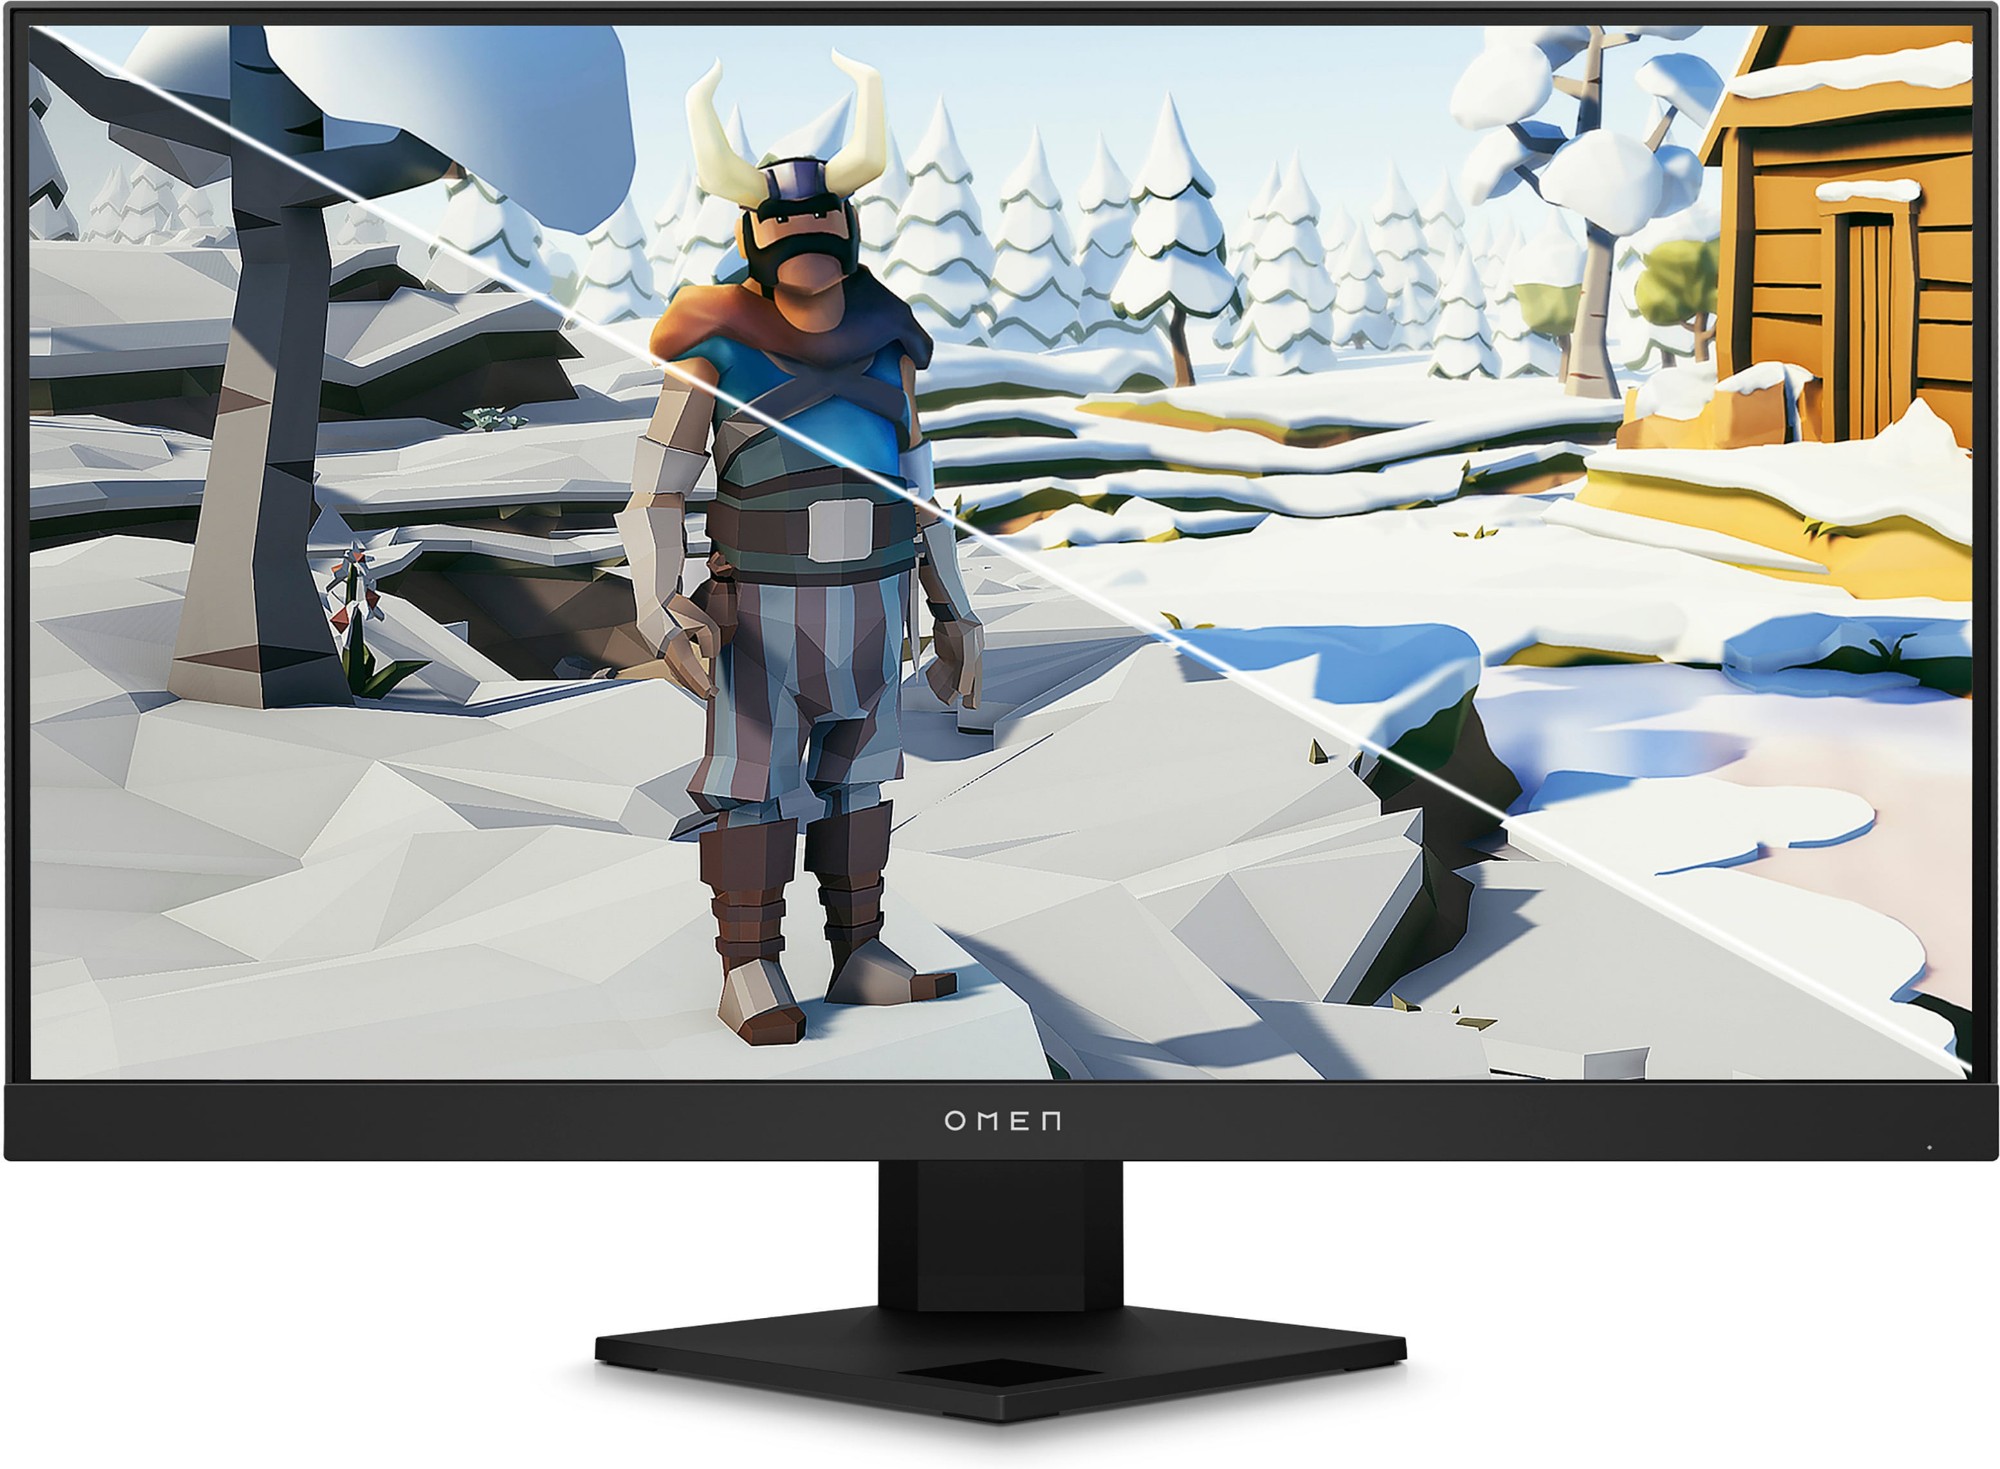 OMEN 25i Monitor  HP® Official Site